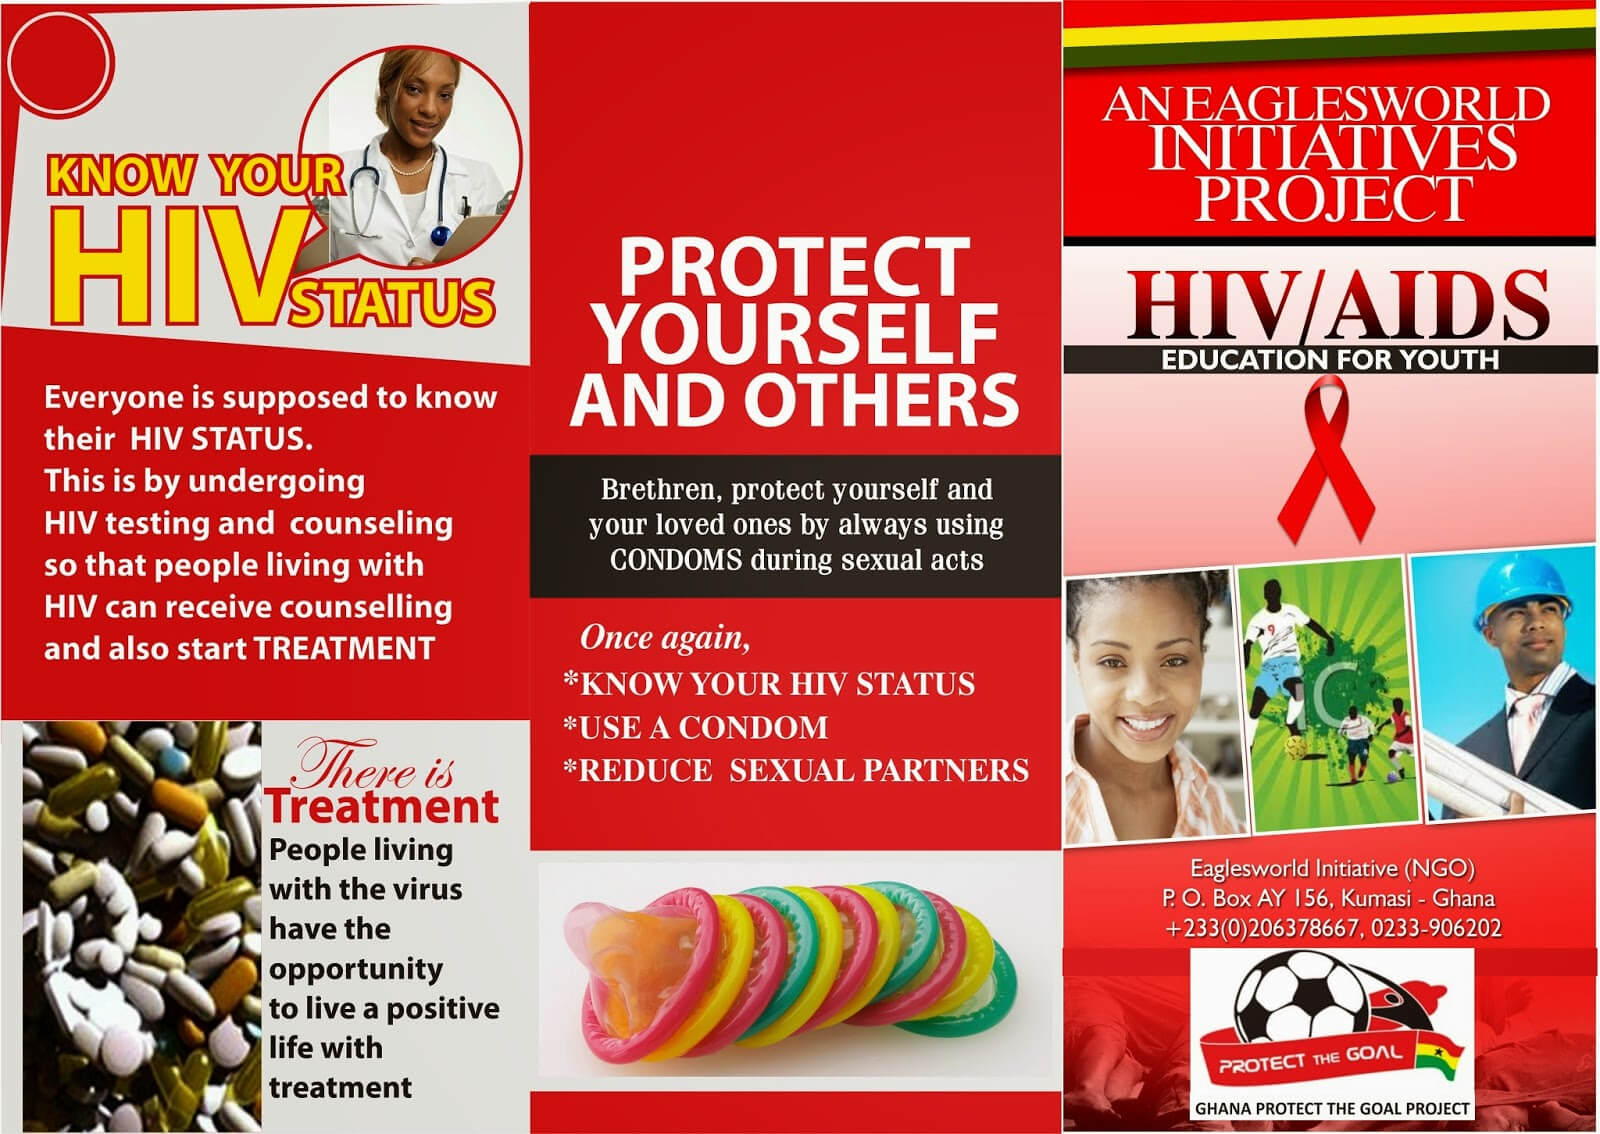 8 Best Photos Of Hiv Brochure Template - Hiv Aids Brochure Throughout Hiv Aids Brochure Templates